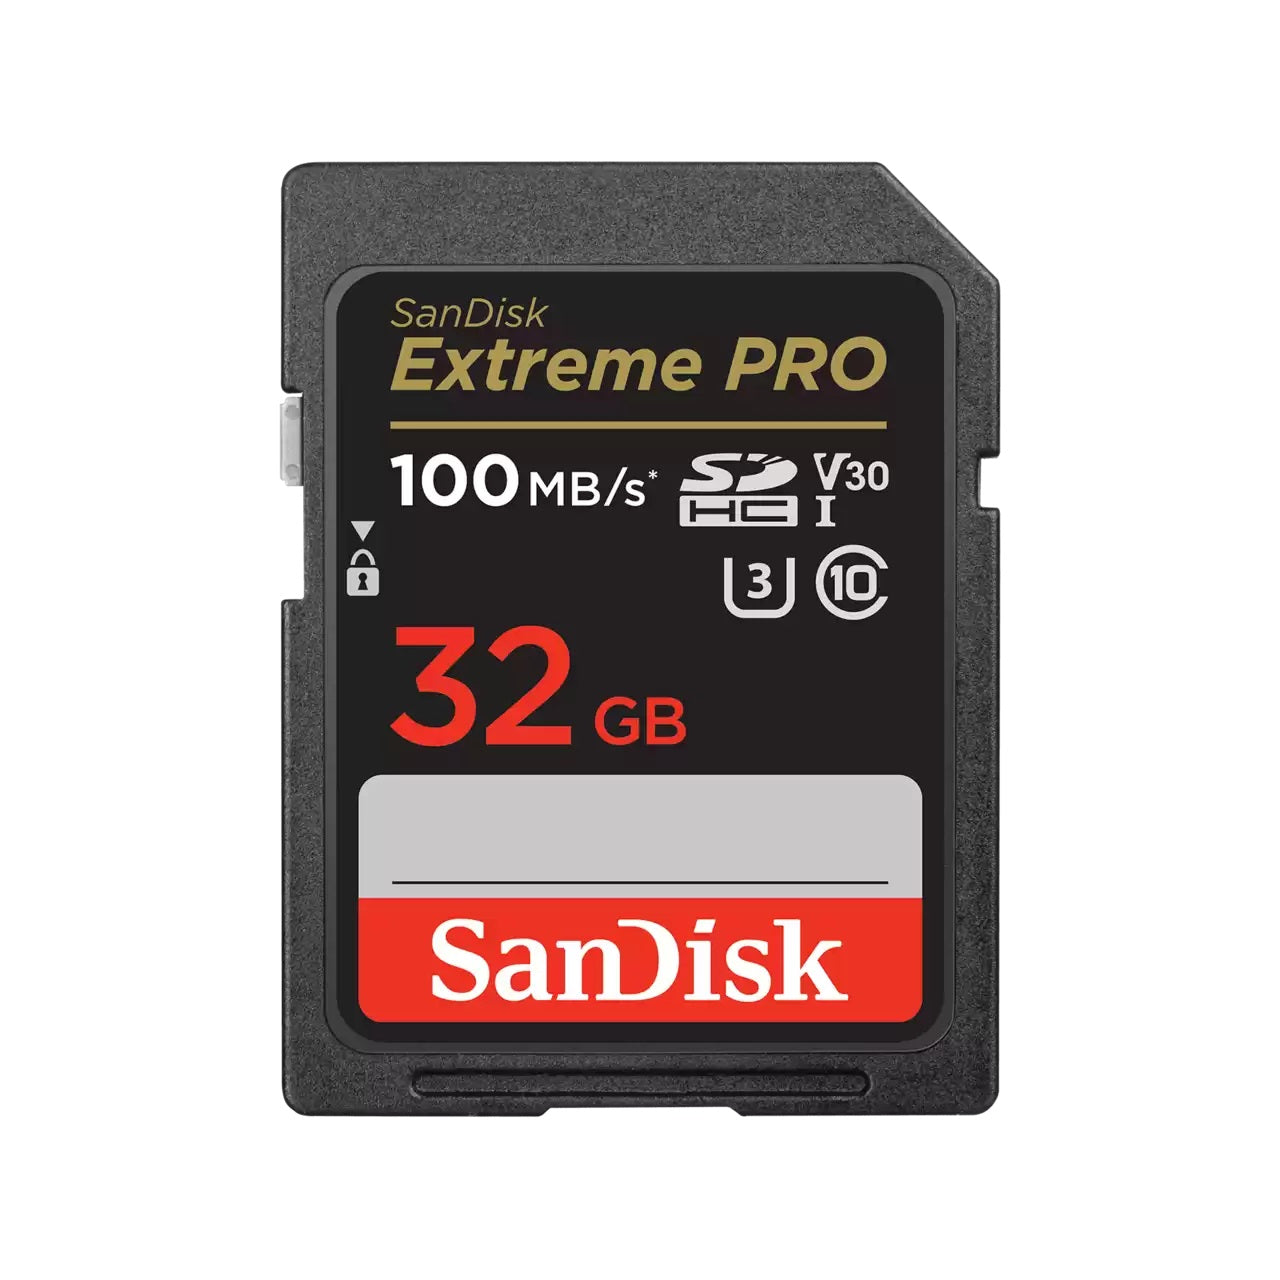 SANDISK EXTREME PRO SDHC 32GB 100MB/S UHS-I MEMORY CARD